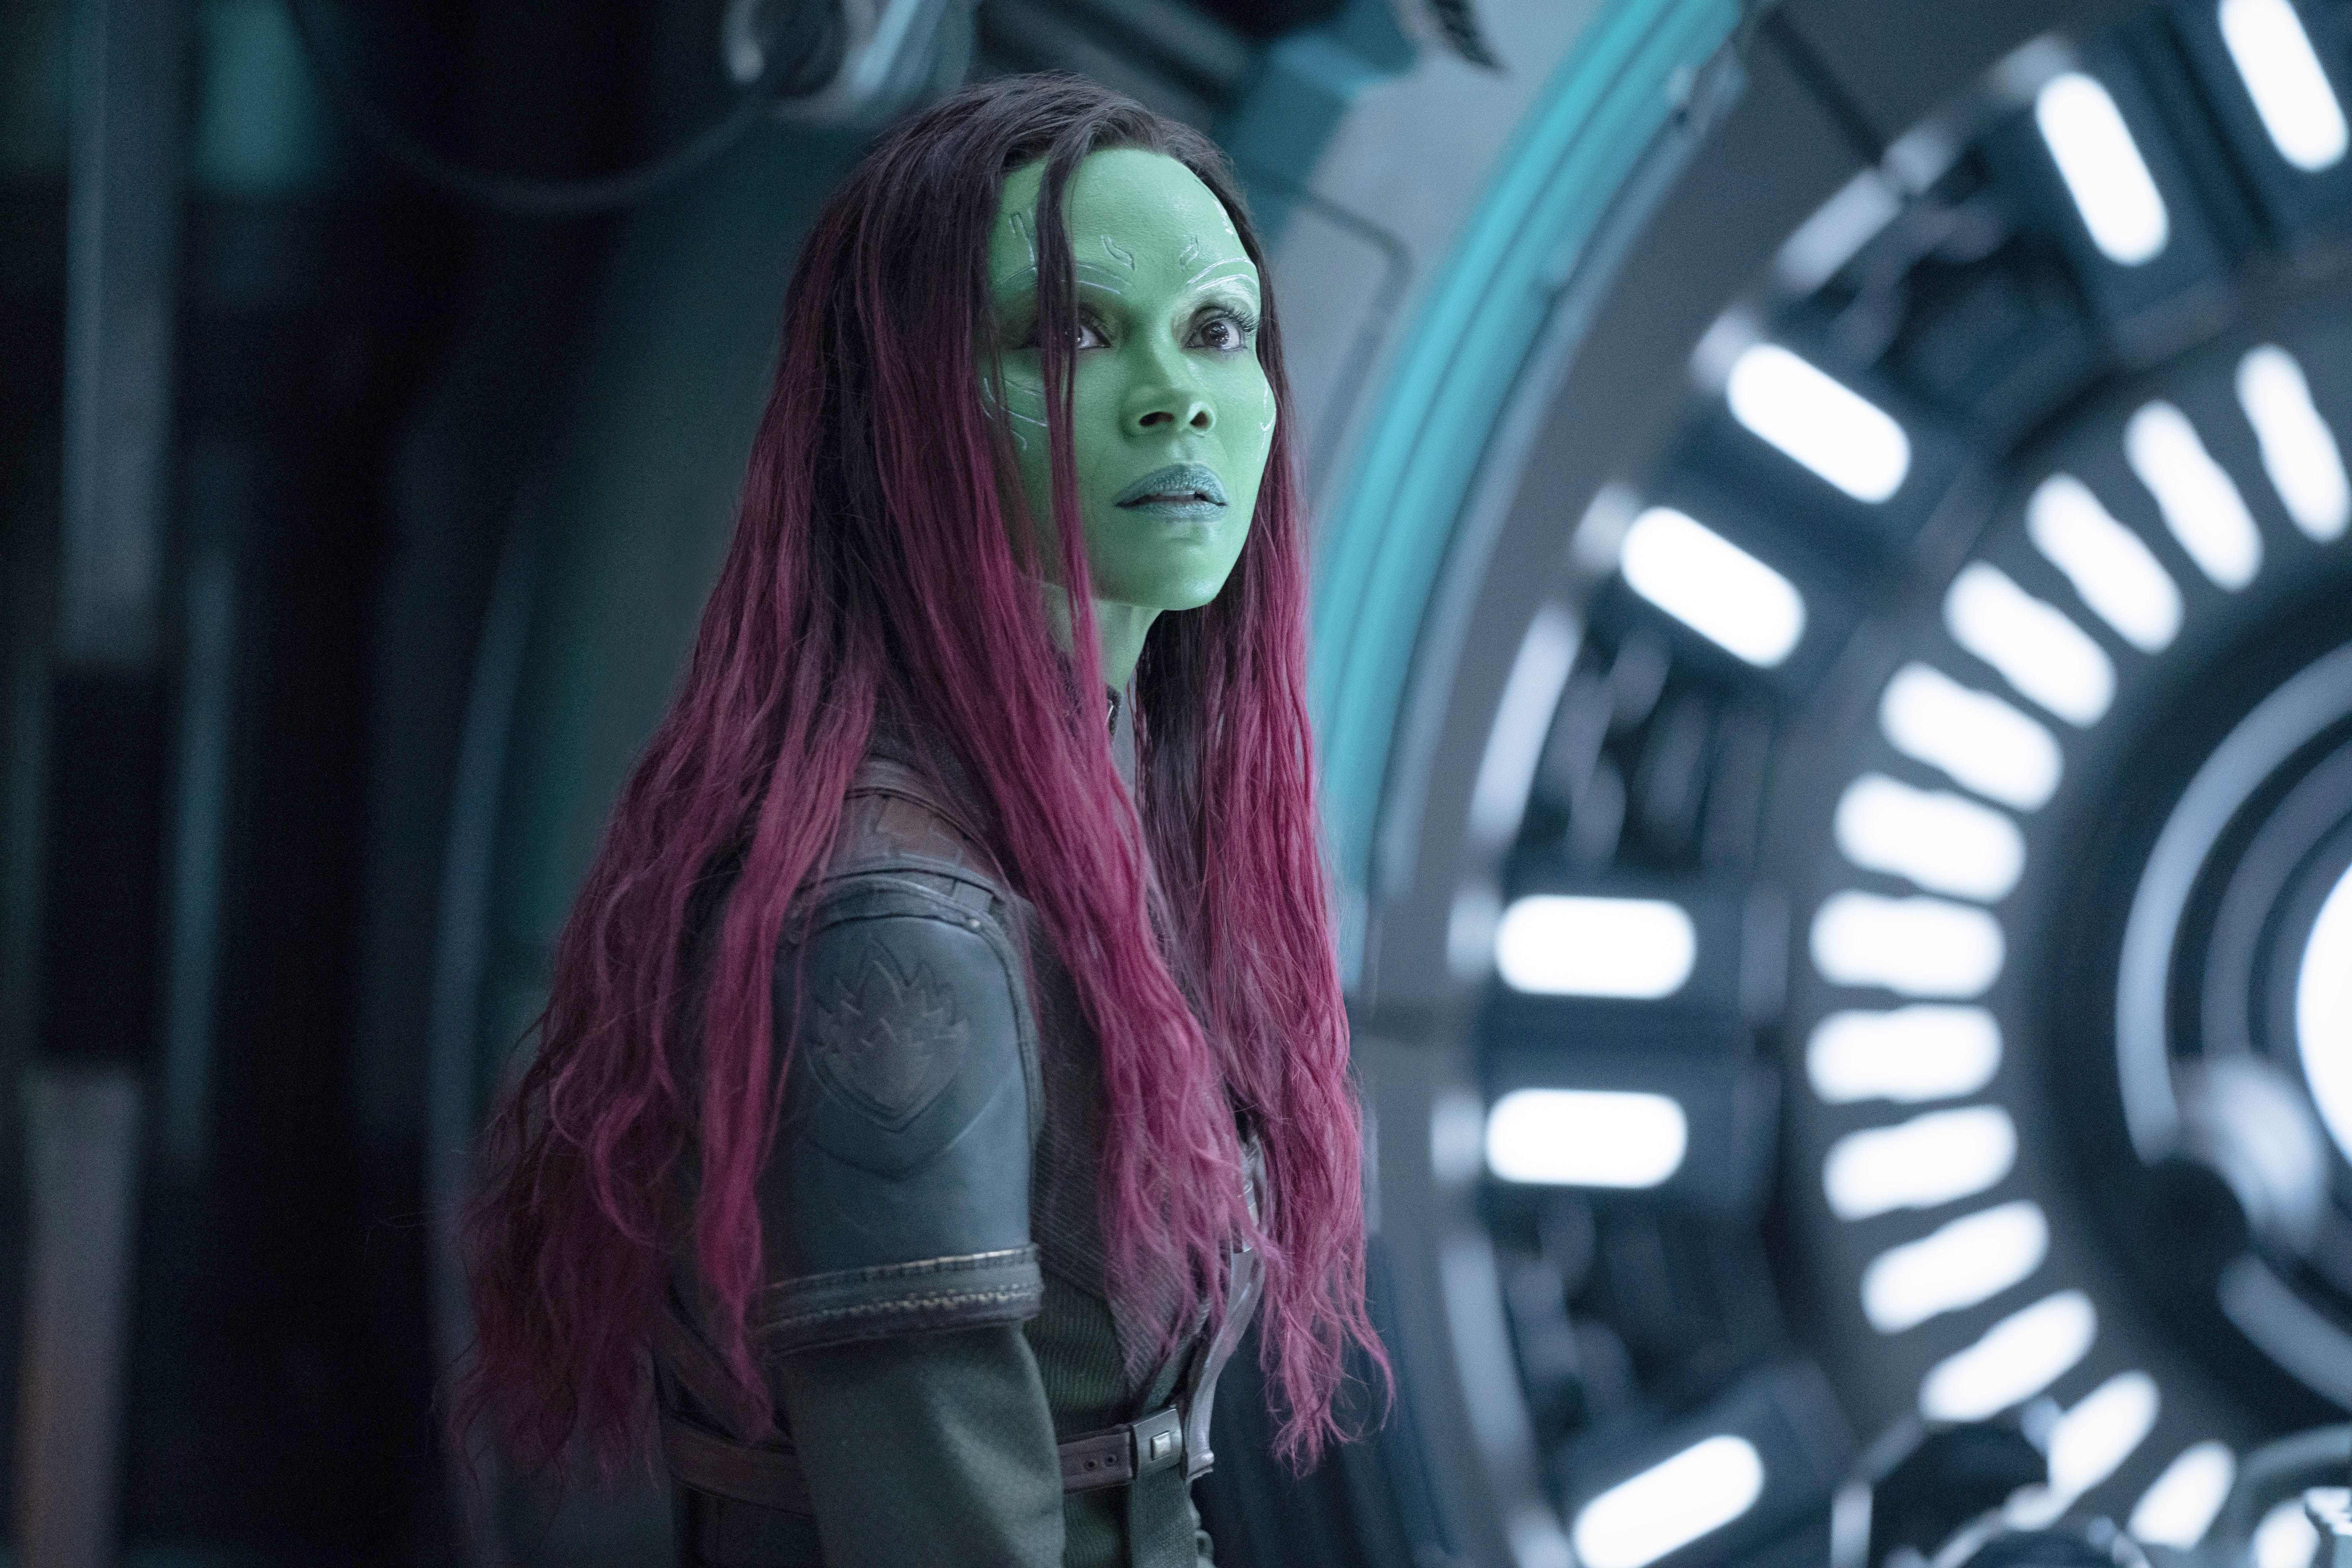 Guardians Of The Galaxy 3' Review: Practically Perfect In Every Way